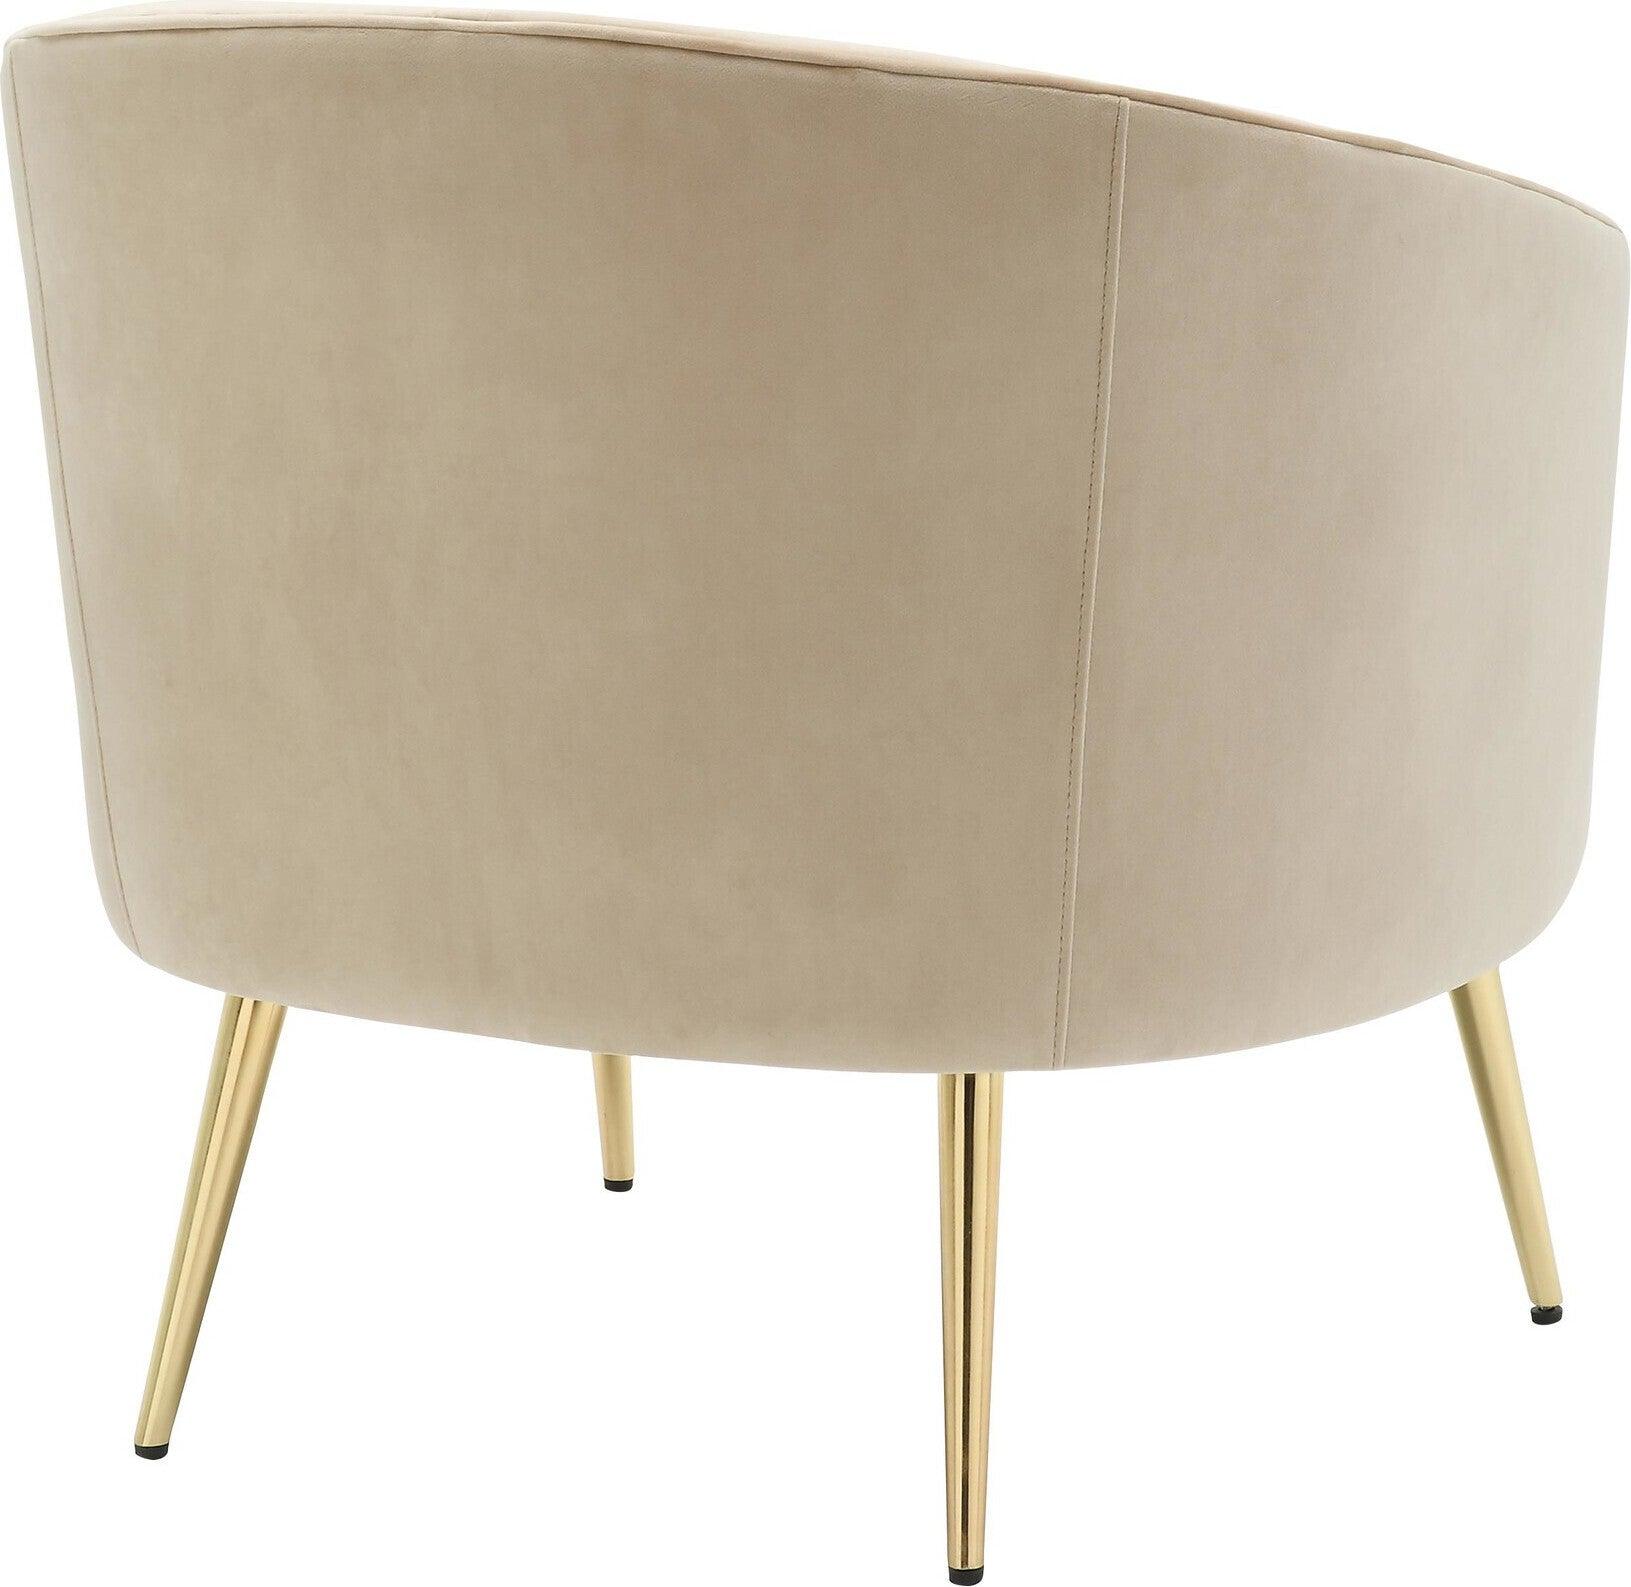 Lumisource Accent Chairs - Tania Accent Chair Gold & Champagne